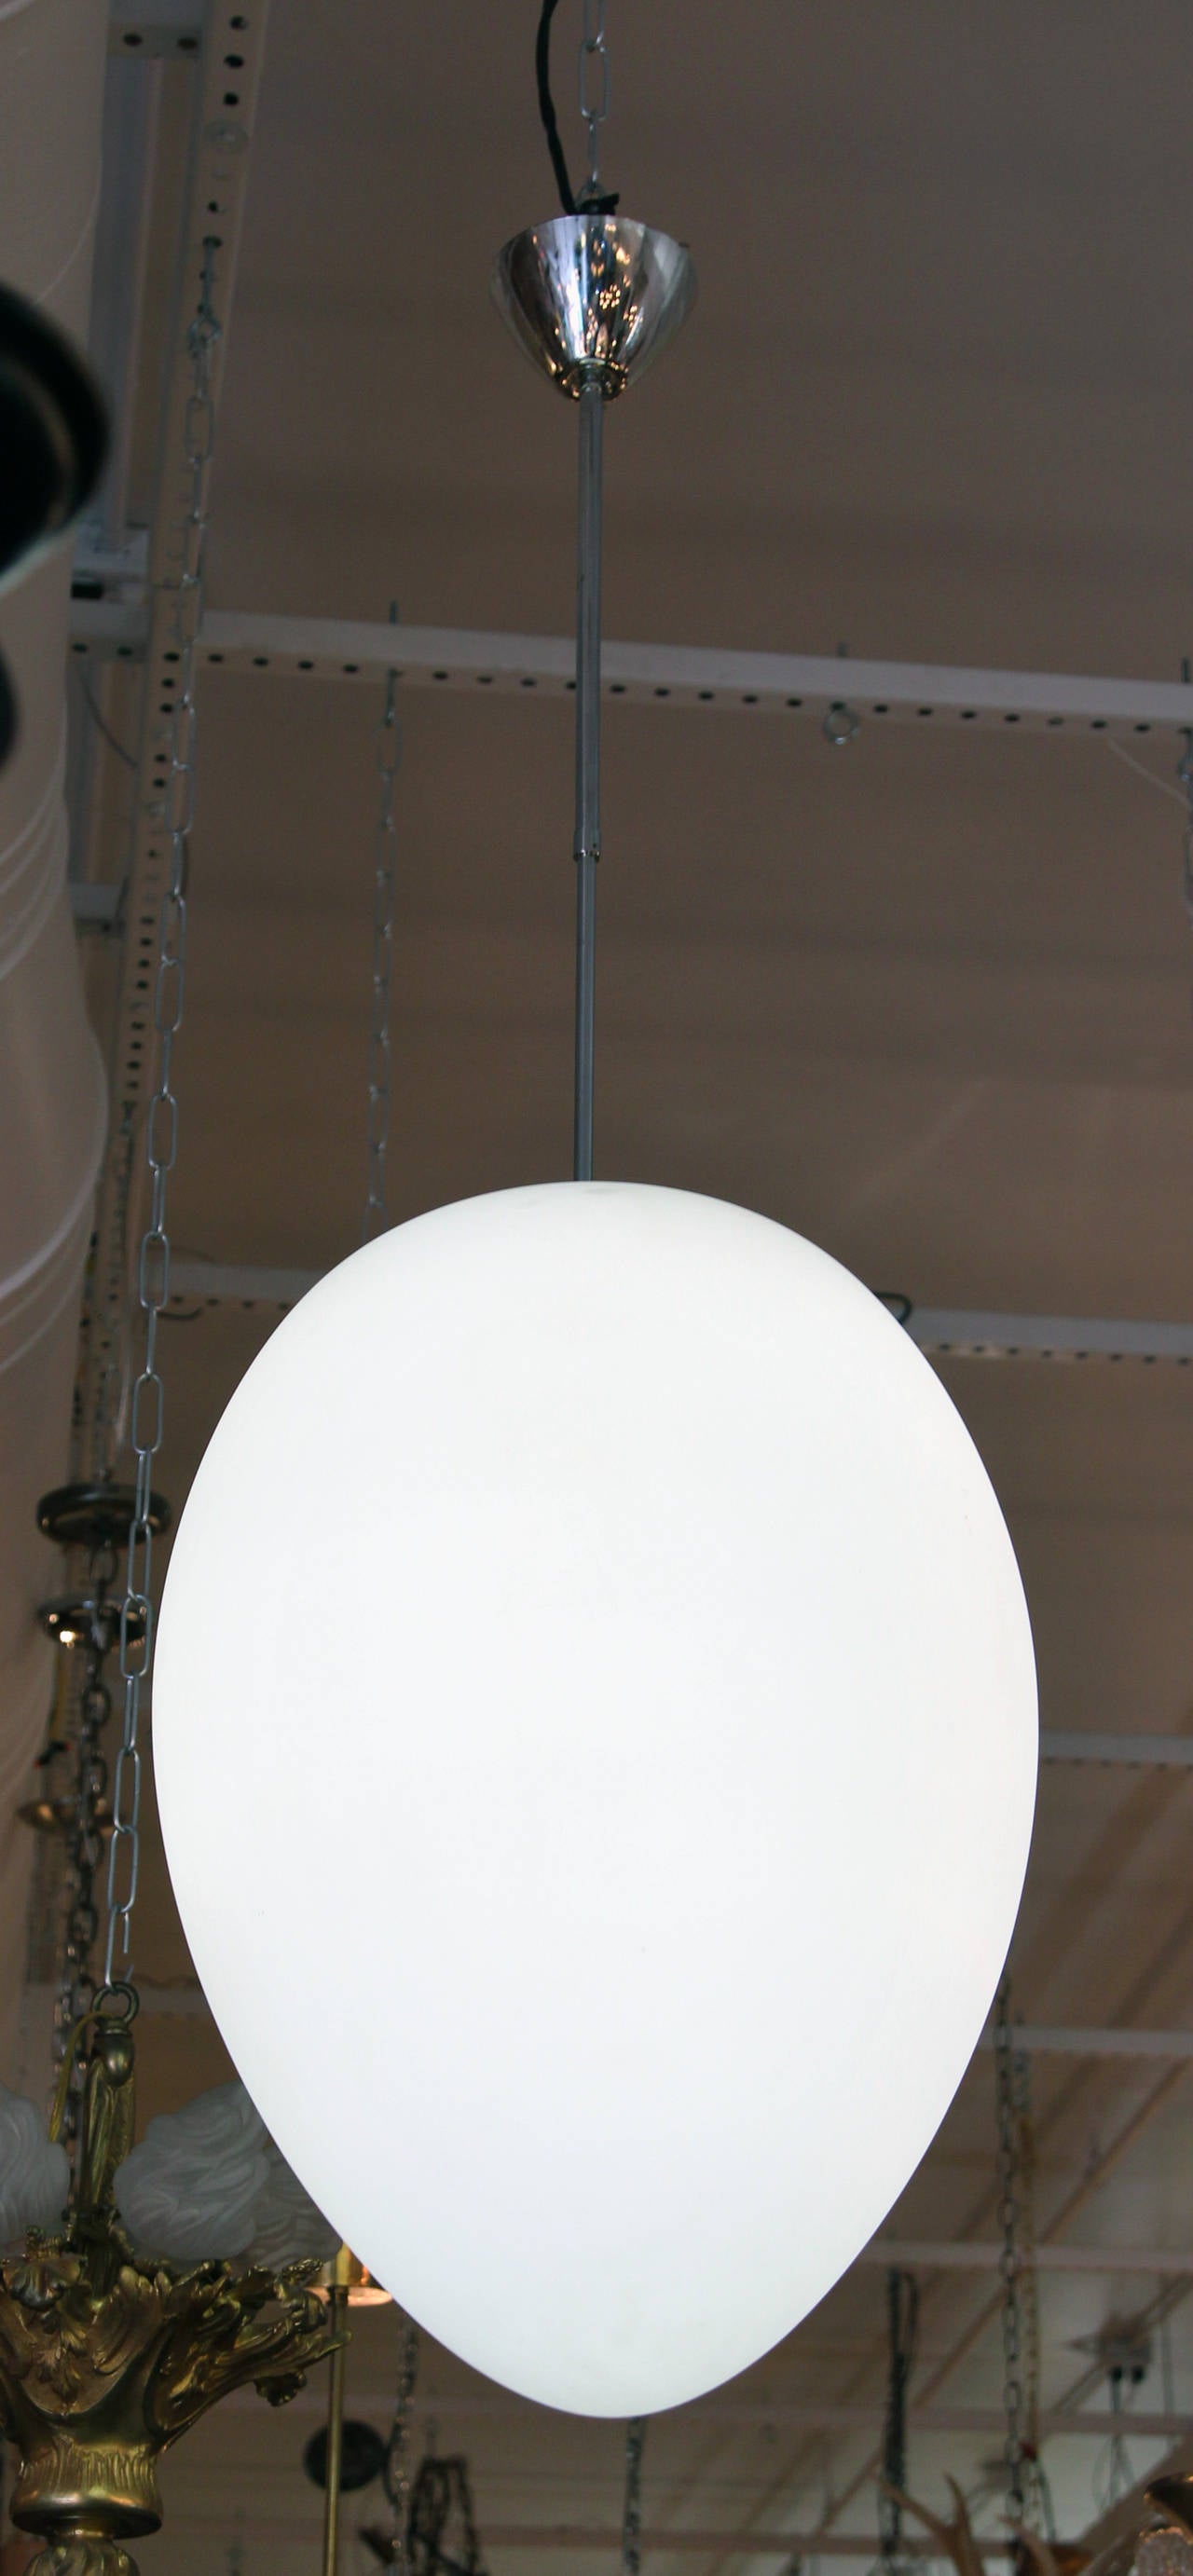 Large 'egg' pendant fixture. Italian made in the 1960s by Fontana Arte. This item can be viewed at our 302 Bowery location in Manhattan.